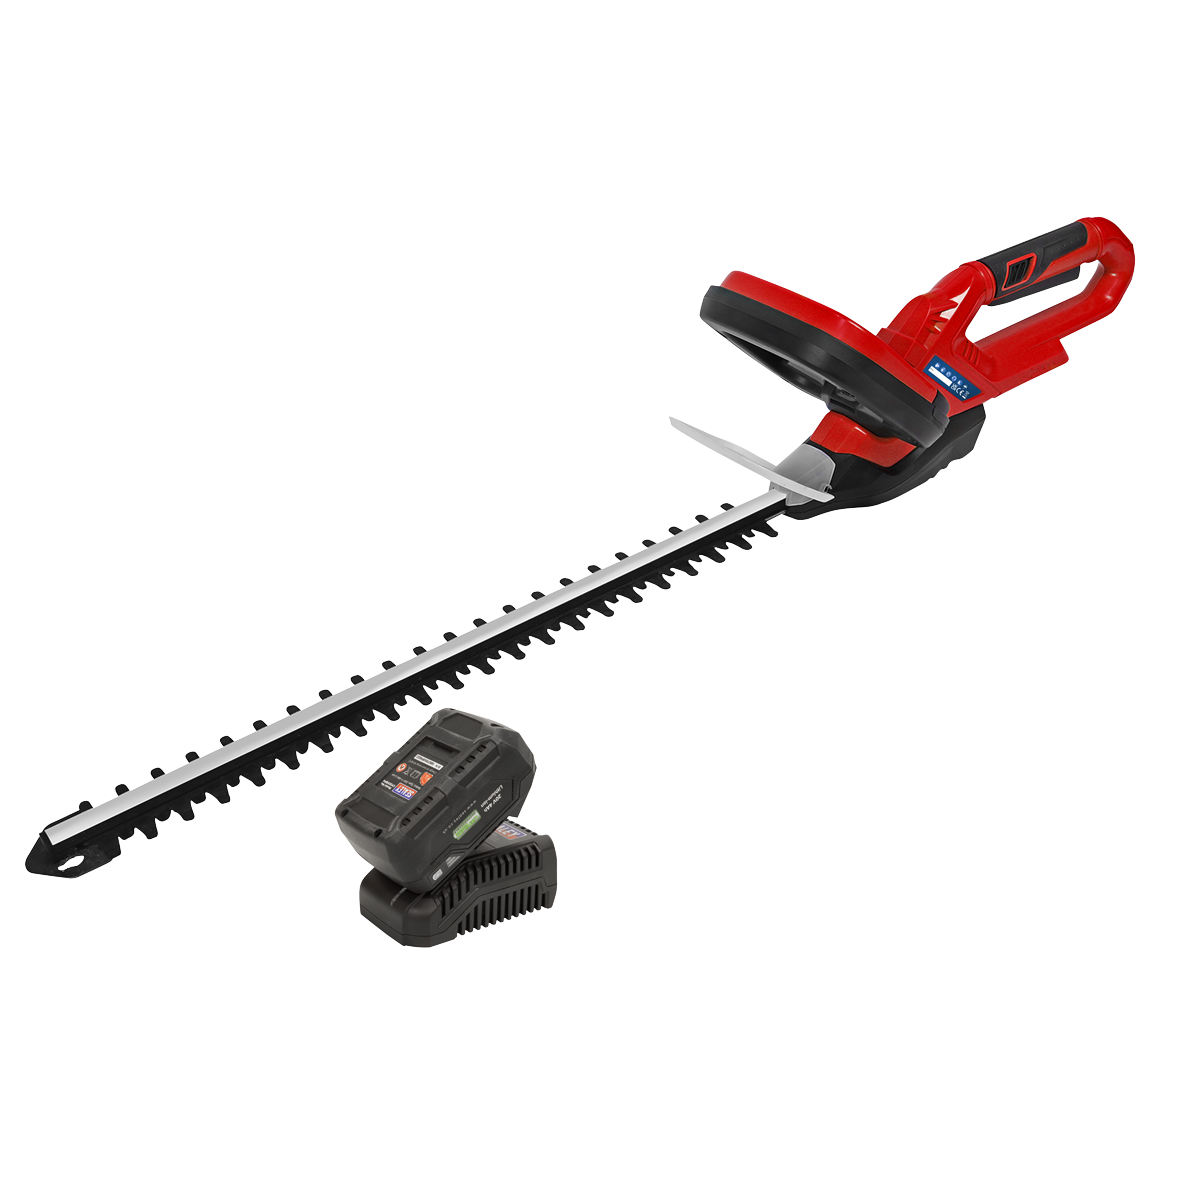 Hedge Trimmer Cordless 20V SV20 Series with 4Ah Battery & Charger - CHT20VCOMBO4 - Farming Parts